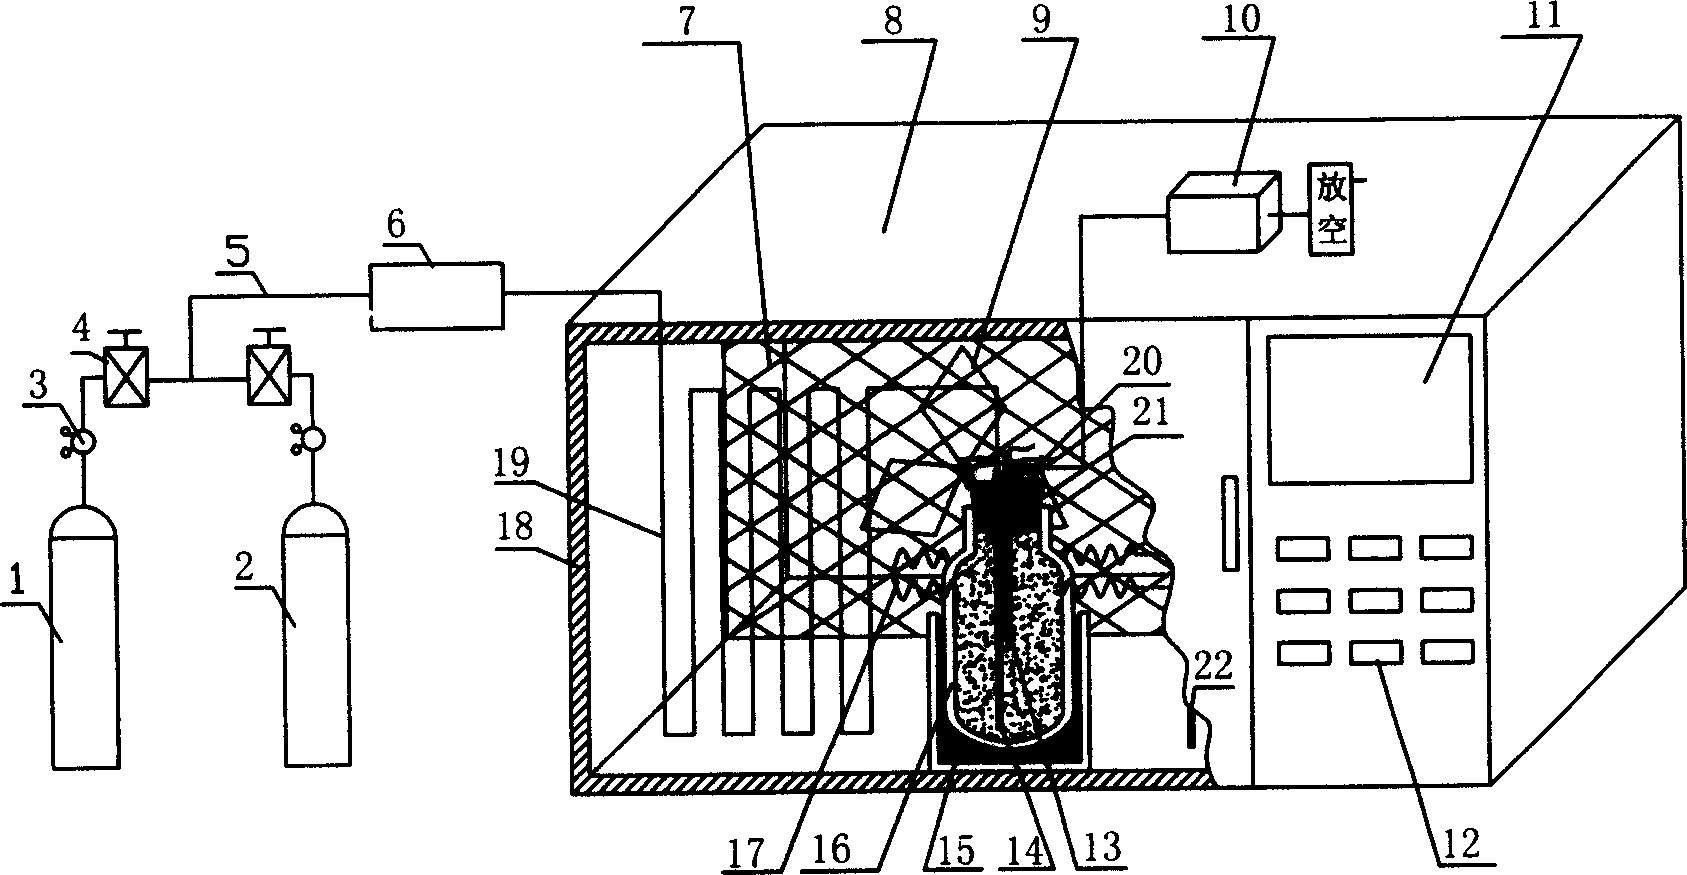 Thermal insulation testing process and apparatus for simulating coal spontaneous combustion procedure